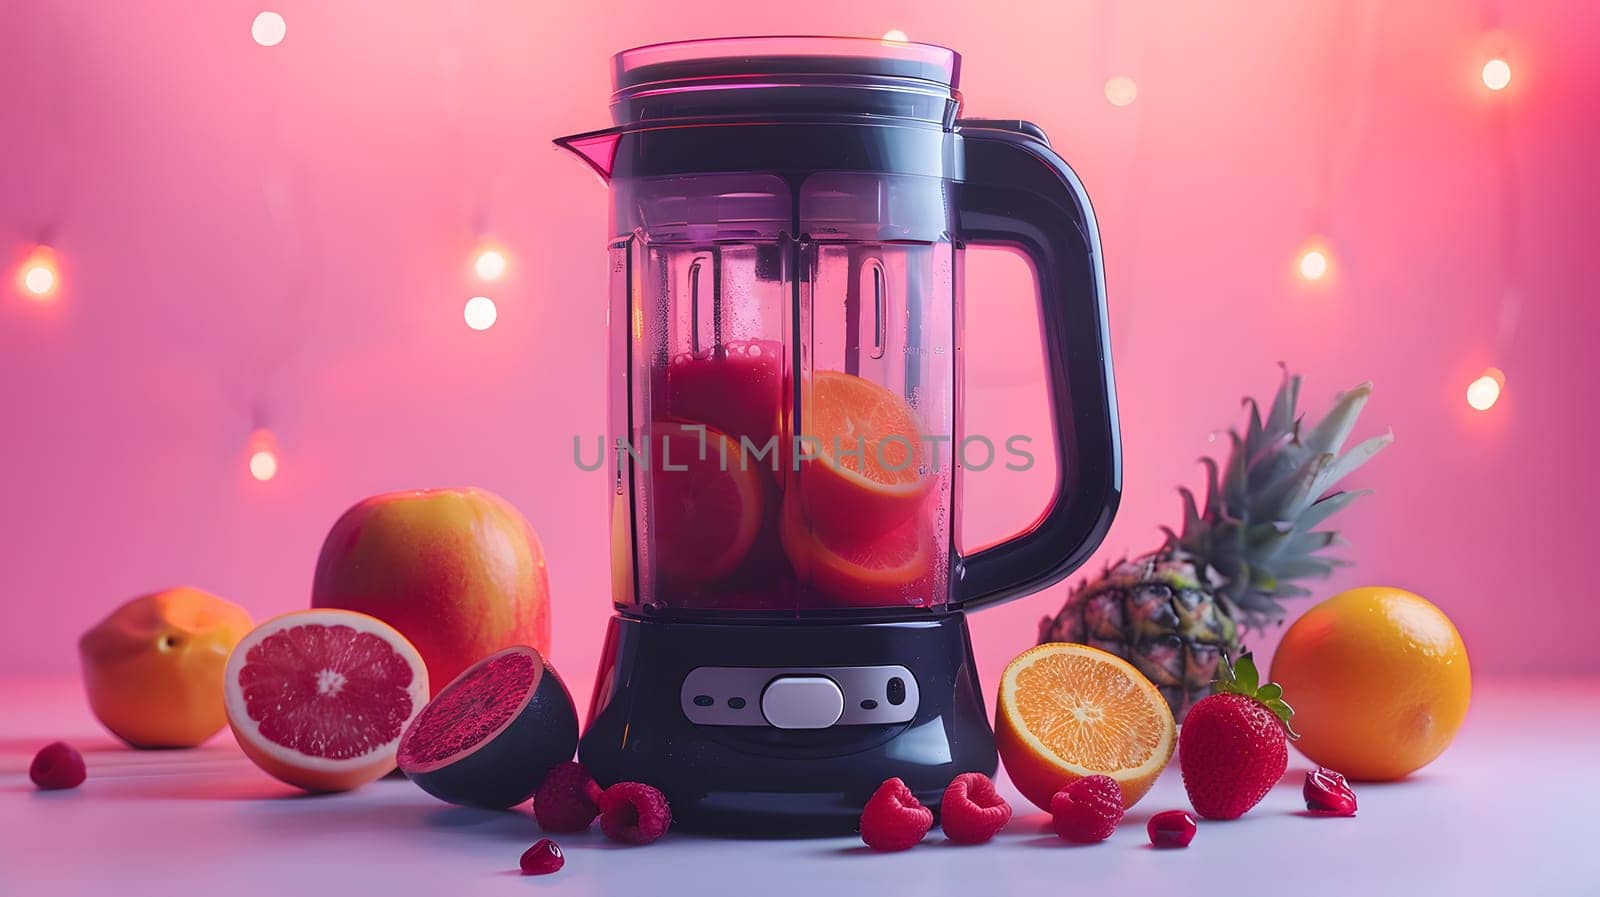 A blender filled with liquid ingredients like tangelo, Valencia orange, and grapefruit surrounded by various fruits on a table